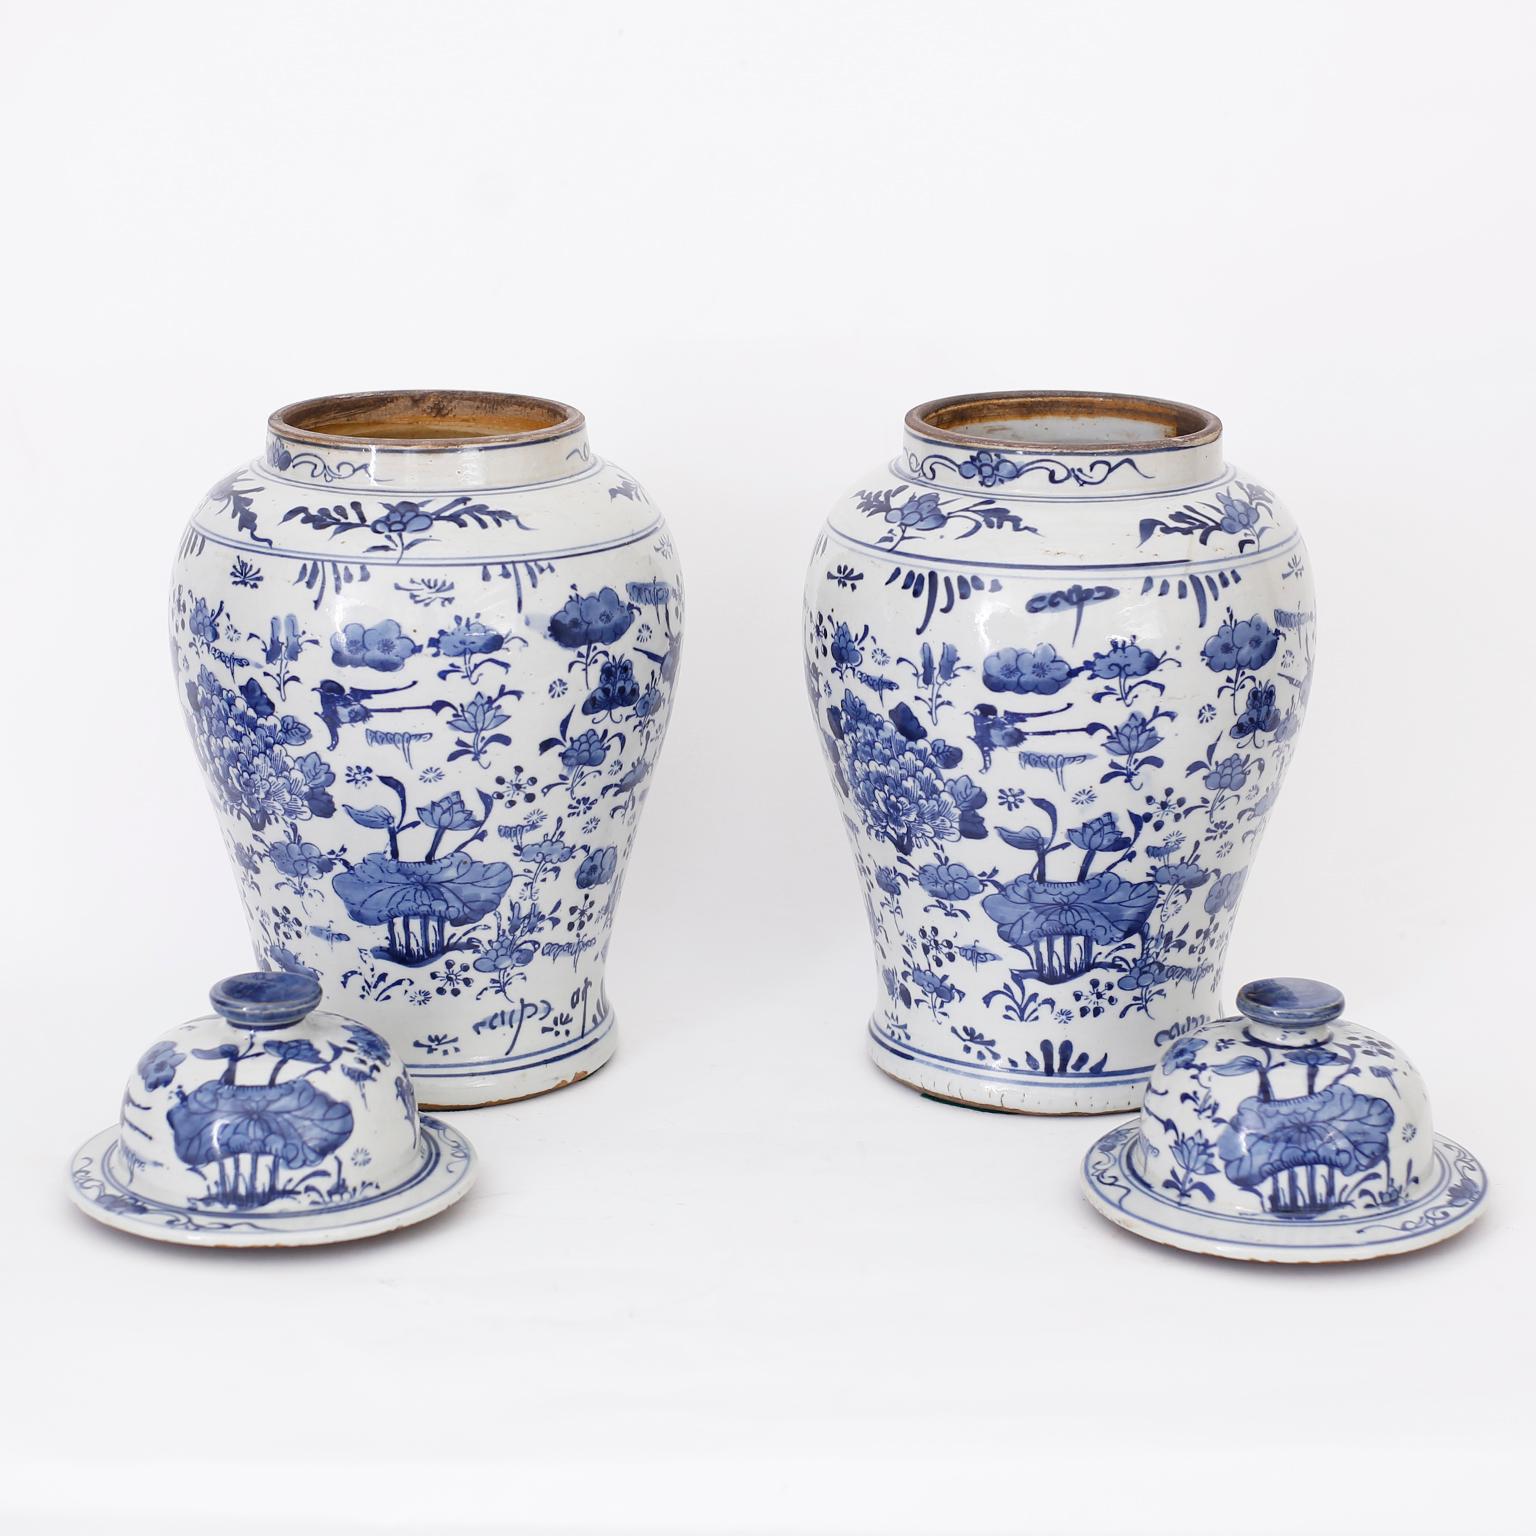 Chinese Export Pair of Blue and White Porcelain Ginger Jars